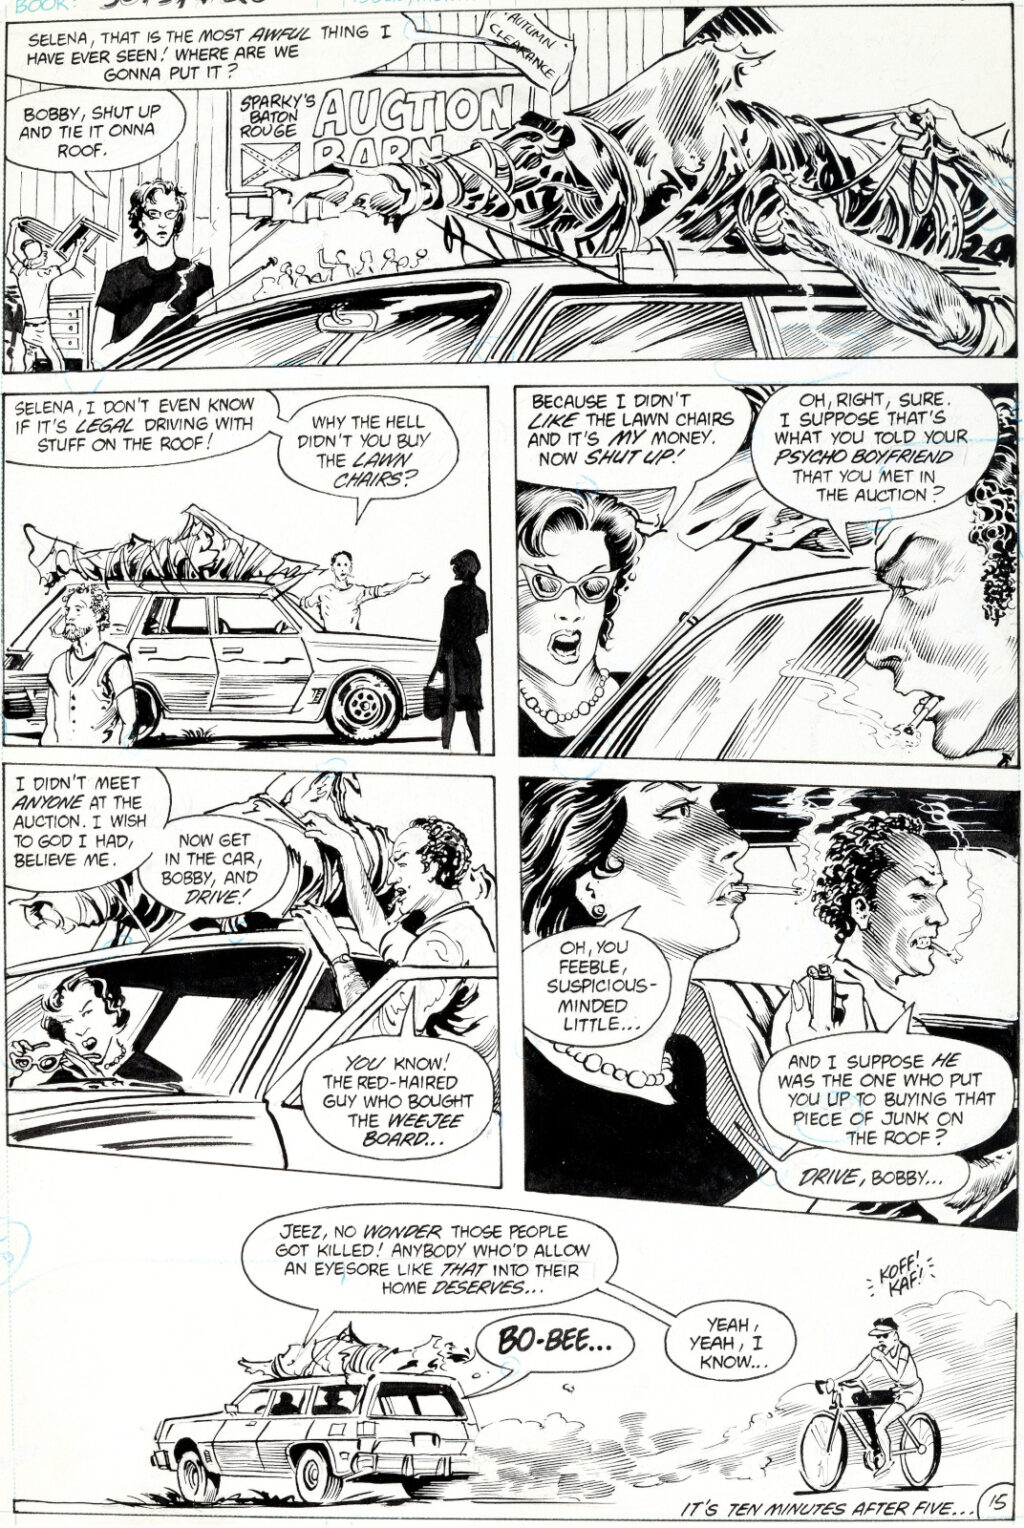 Saga of the Swamp Thing issue 25 page 15 by Stephen Bissette and John Totleben